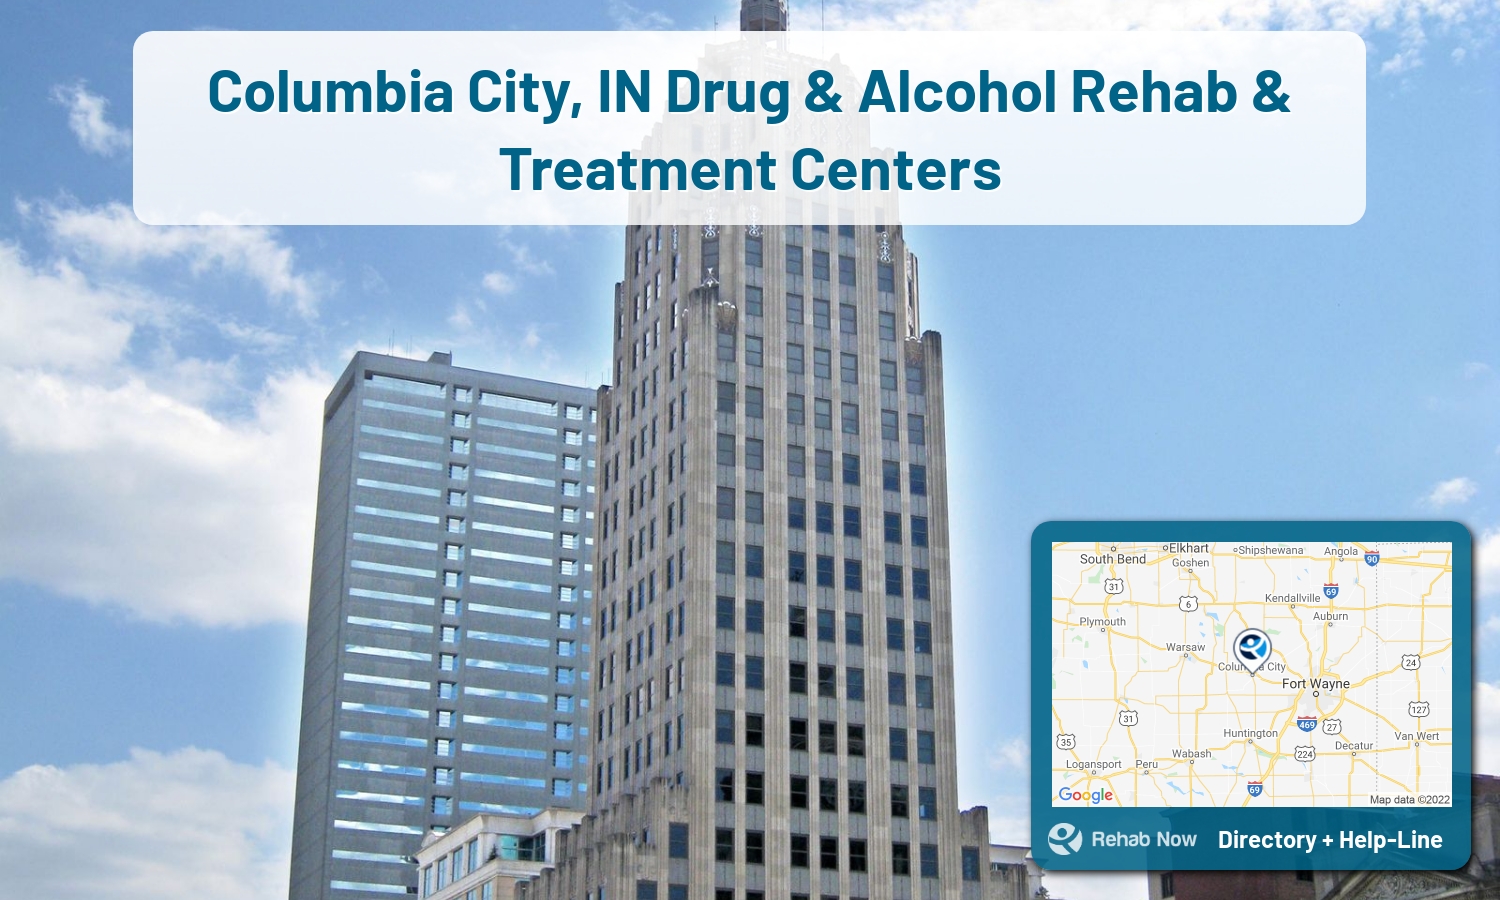 Columbia City, IN Treatment Centers. Find drug rehab in Columbia City, Indiana, or detox and treatment programs. Get the right help now!